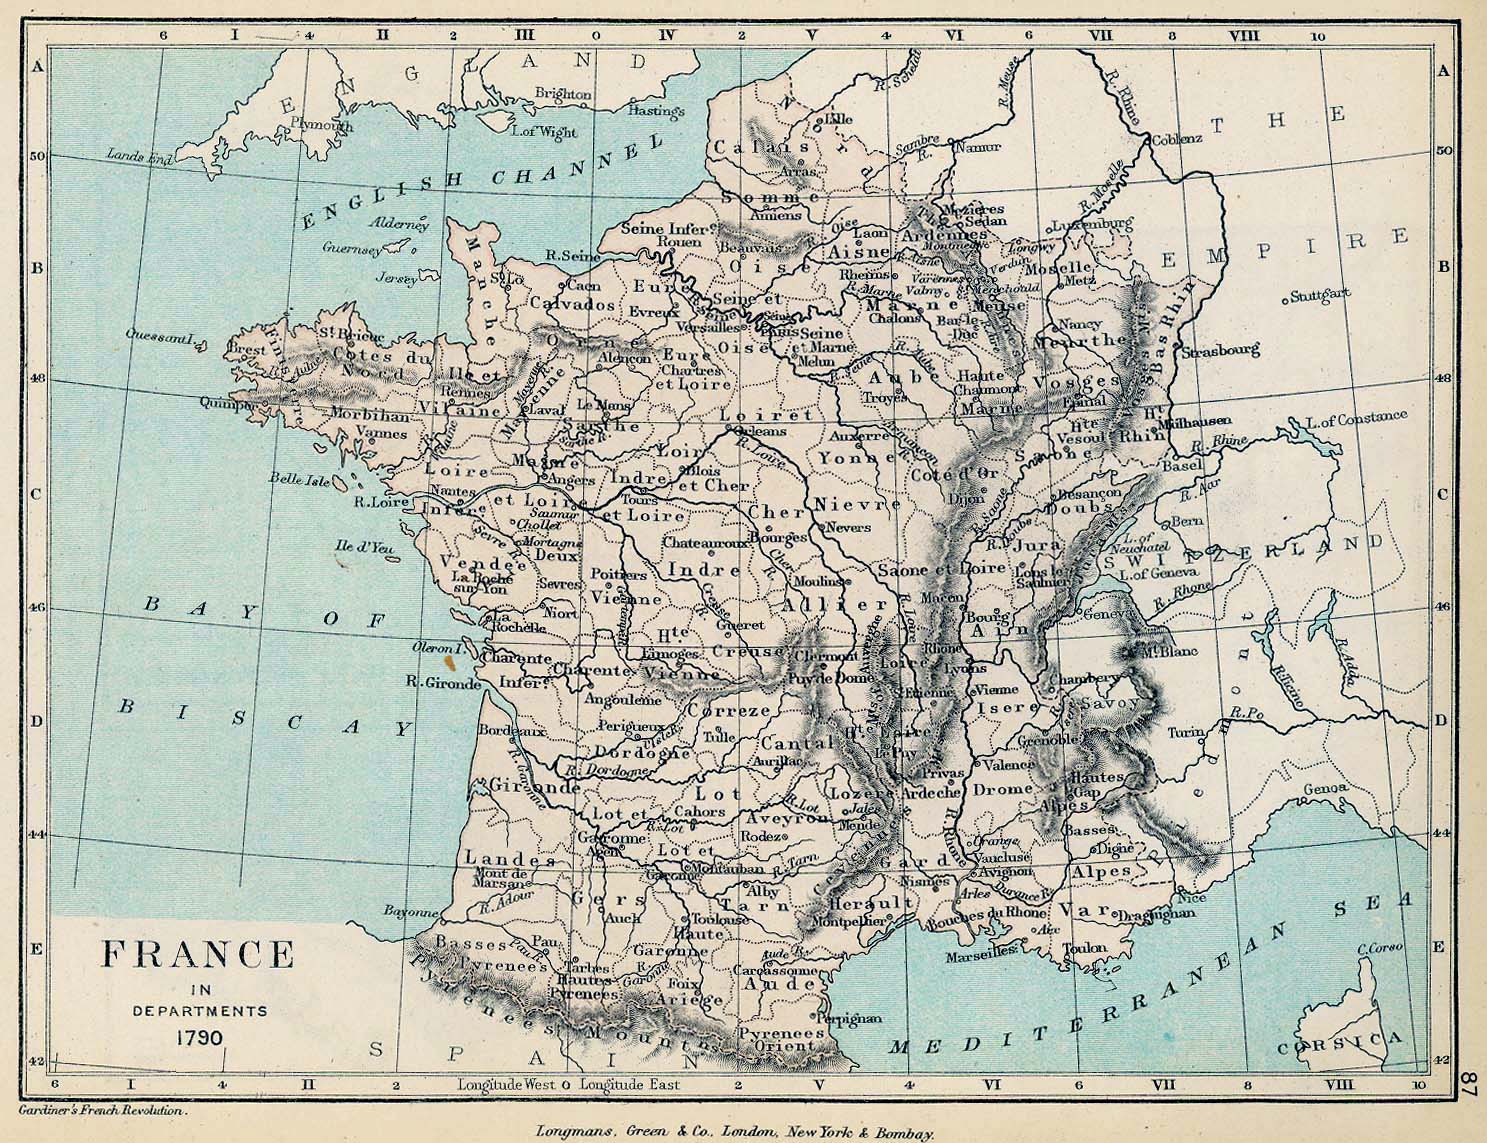 Map of France in Departments 1790